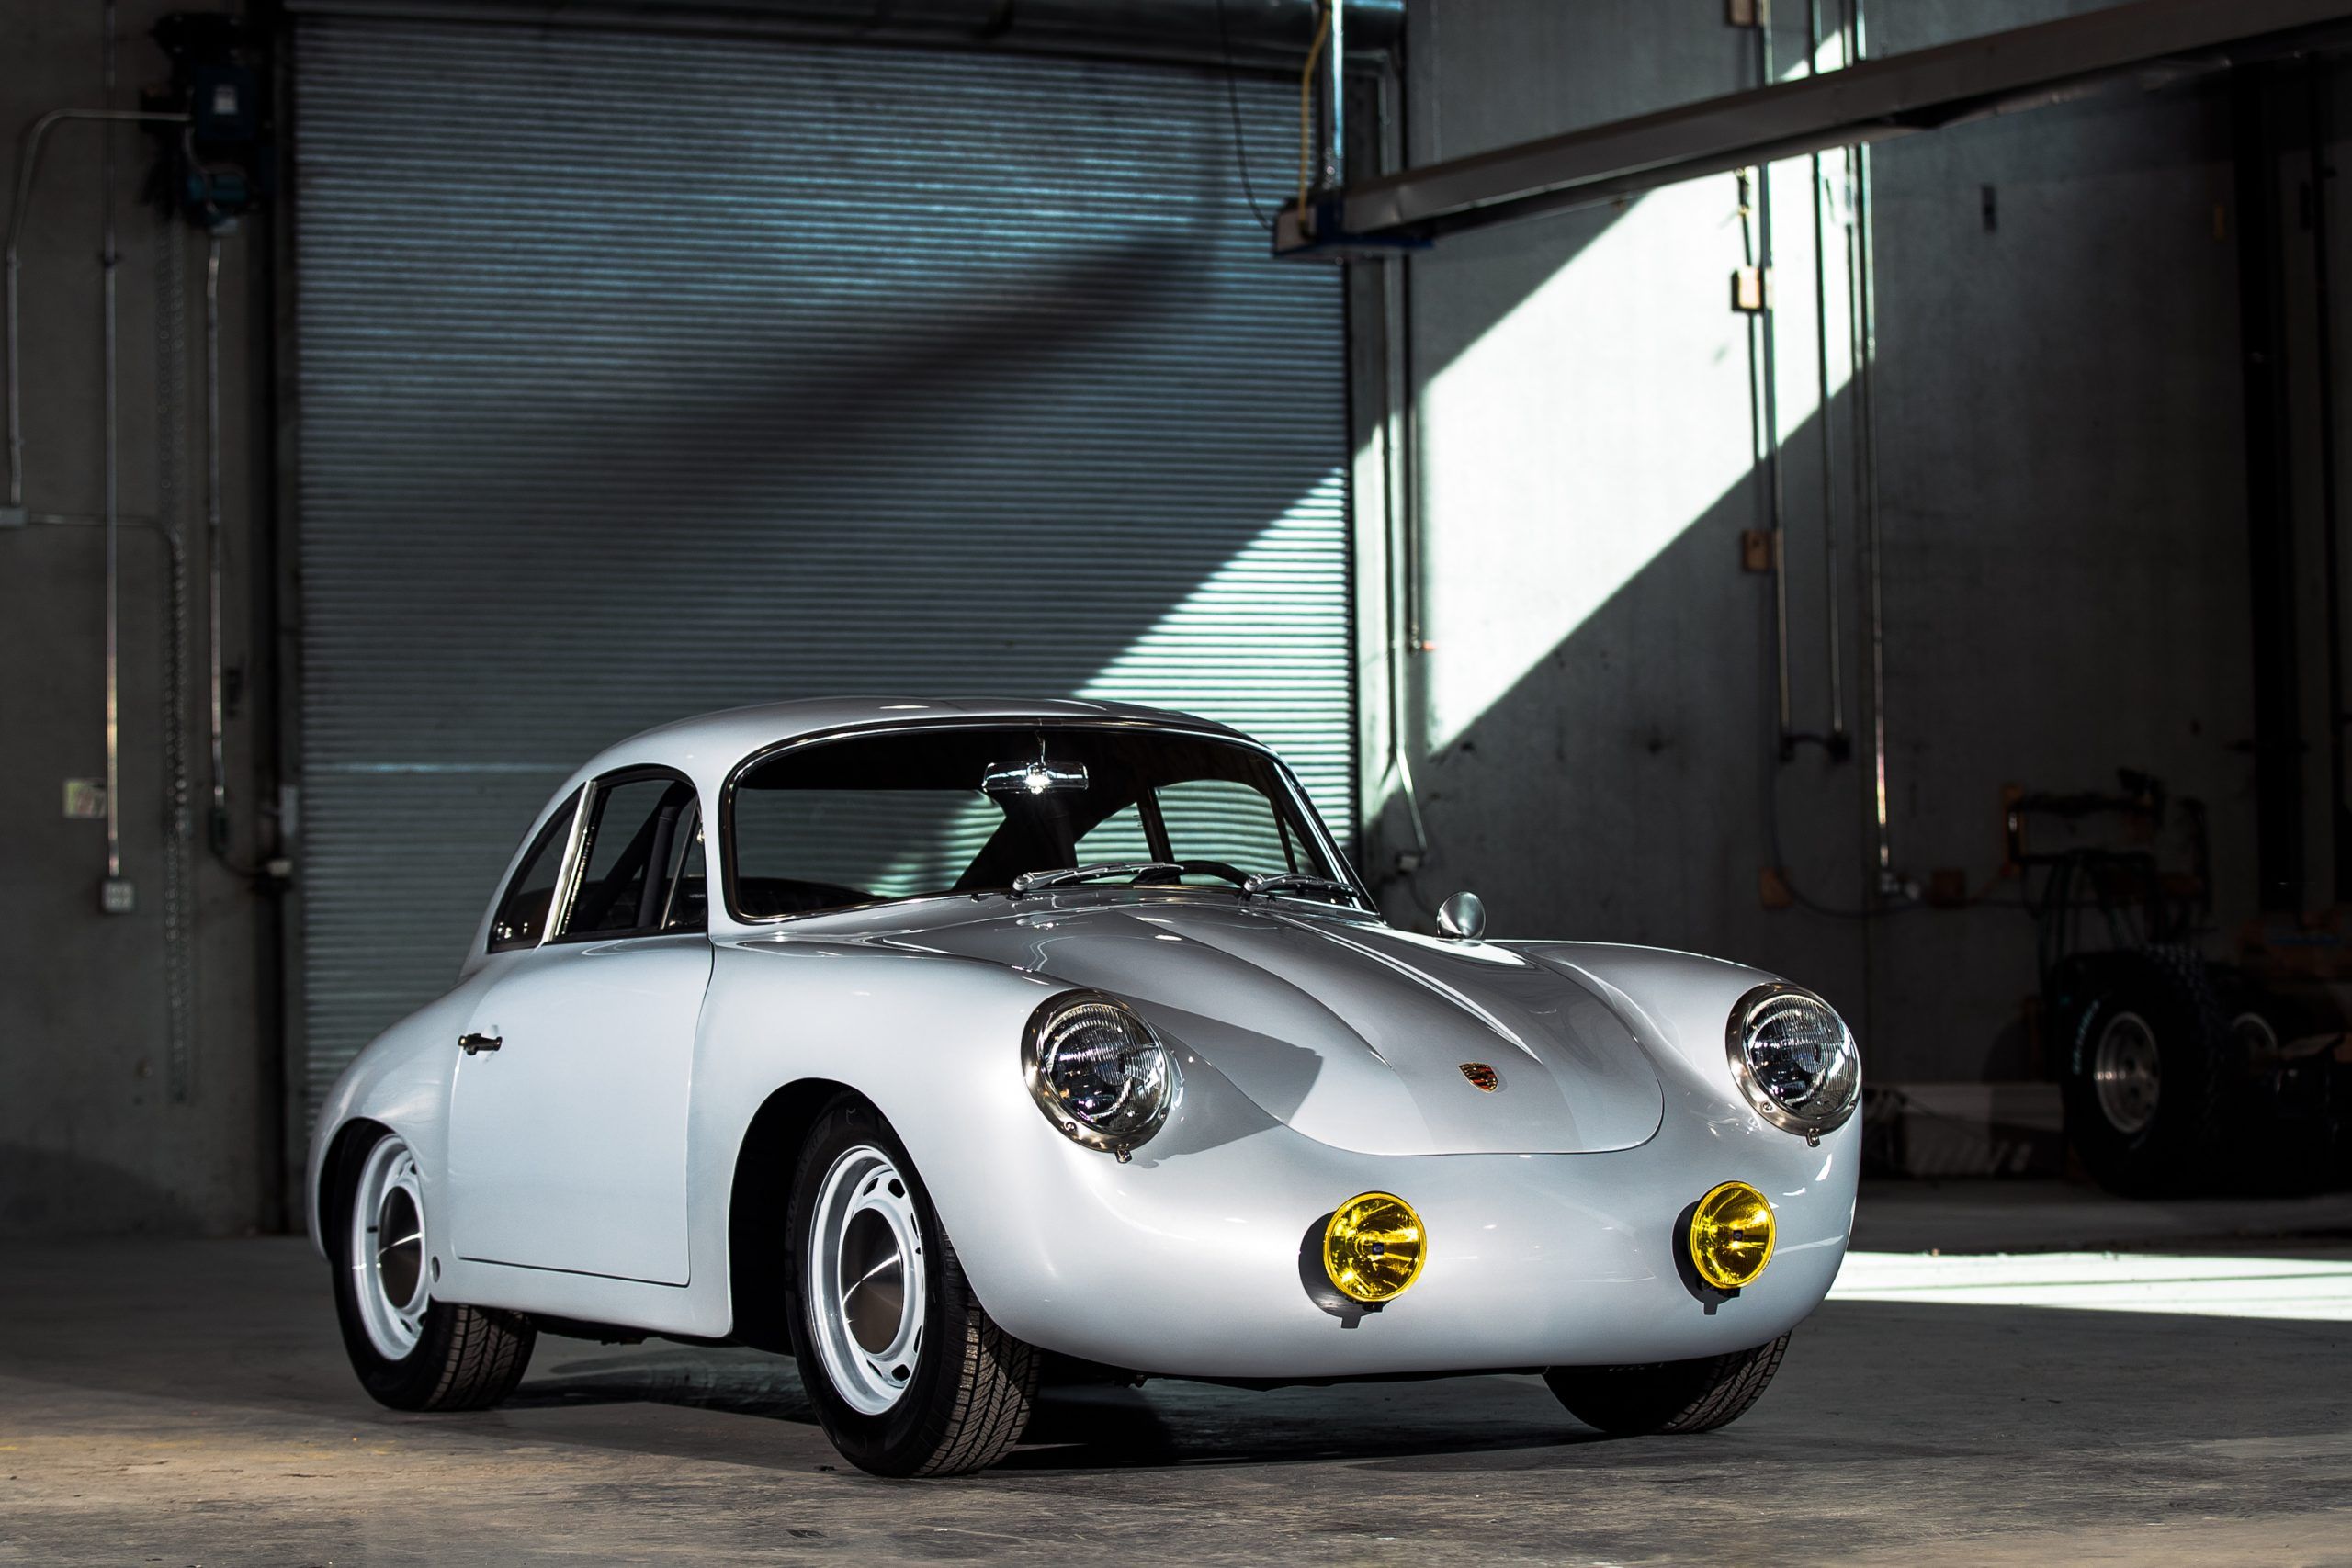 This B.C. shop turns classic cars into high-performance EVs